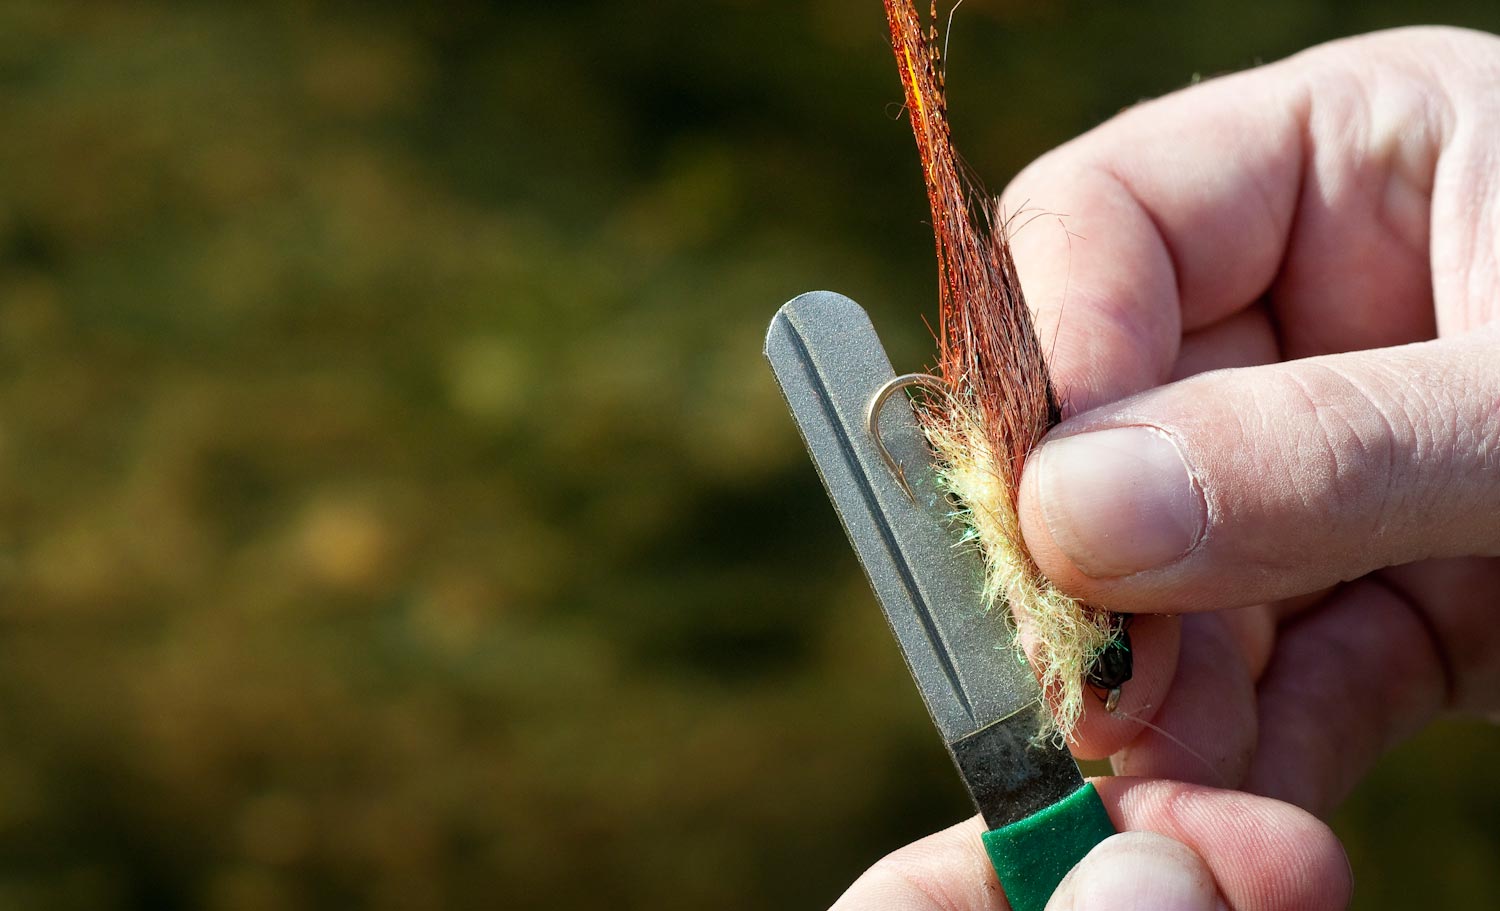 Should You Be Sharpening Your Hooks More? - Fly Fishing, Gink and Gasoline, How to Fly Fish, Trout Fishing, Fly Tying